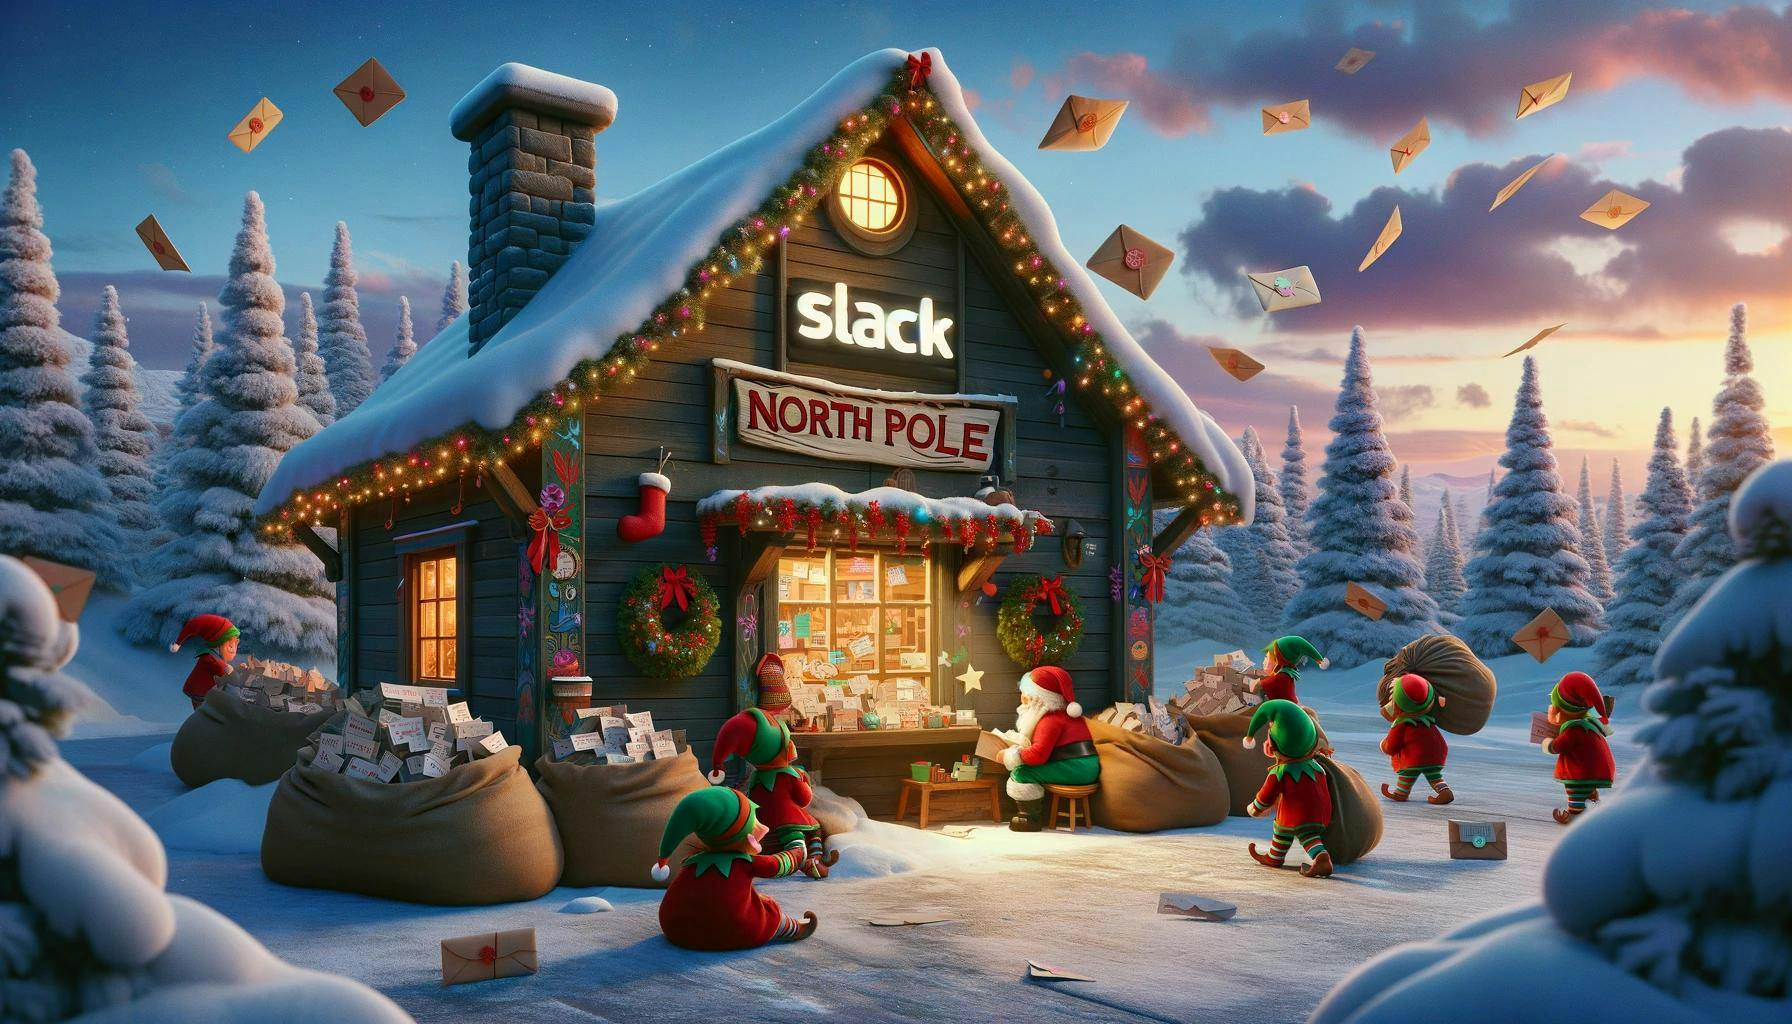 Letters arriving at Slack's North Pole offices